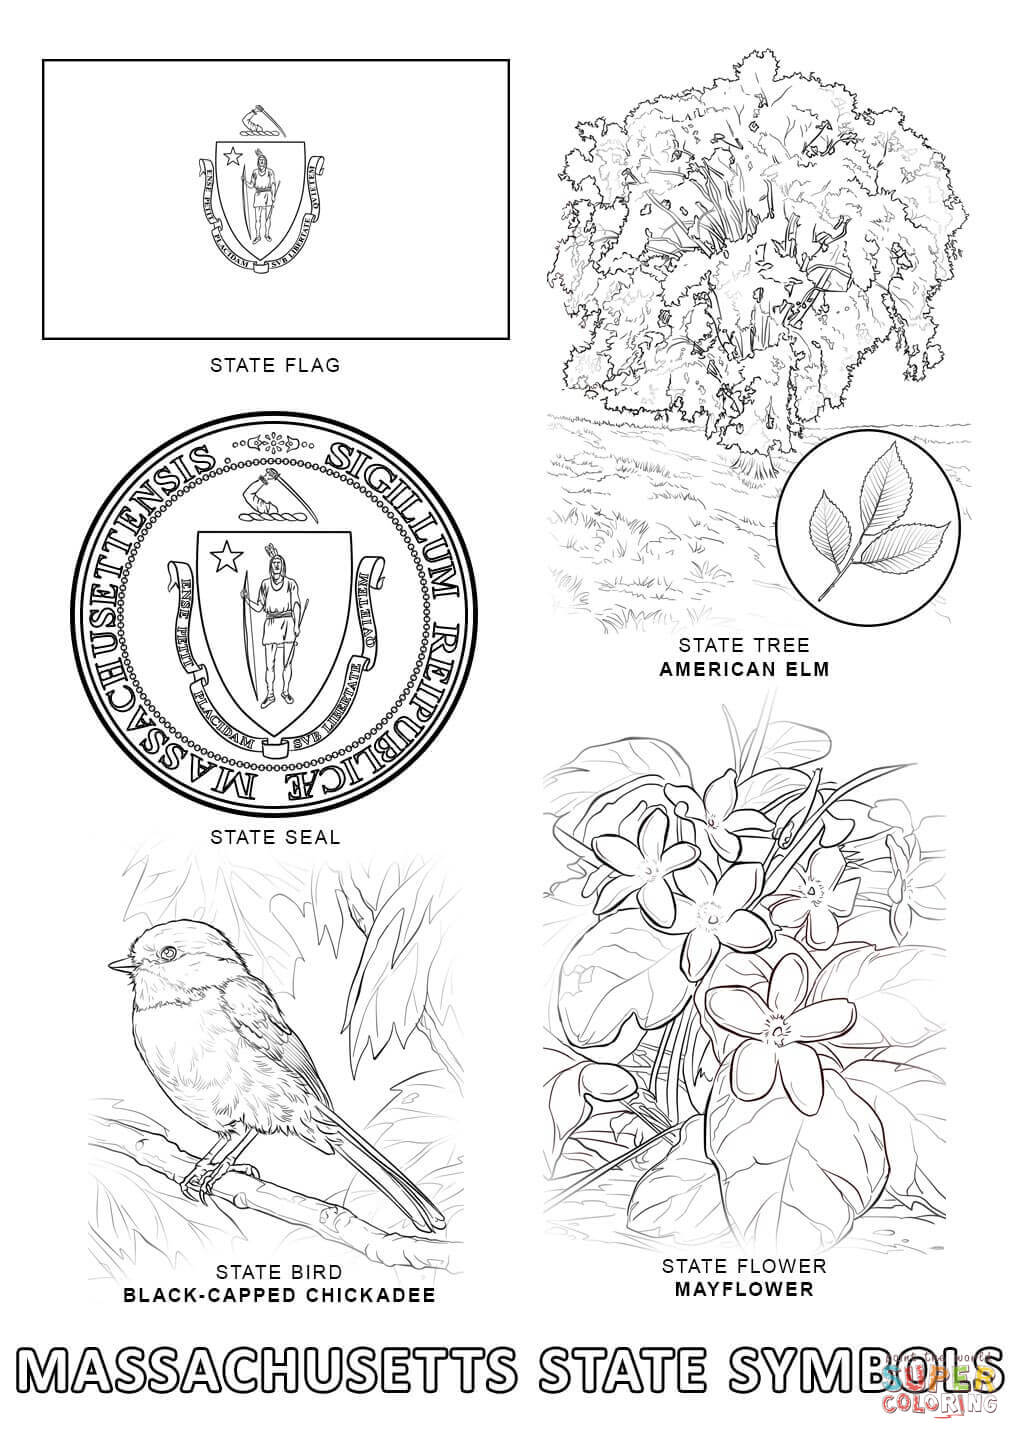 Massachusetts State Symbols coloring page | Free Printable ...